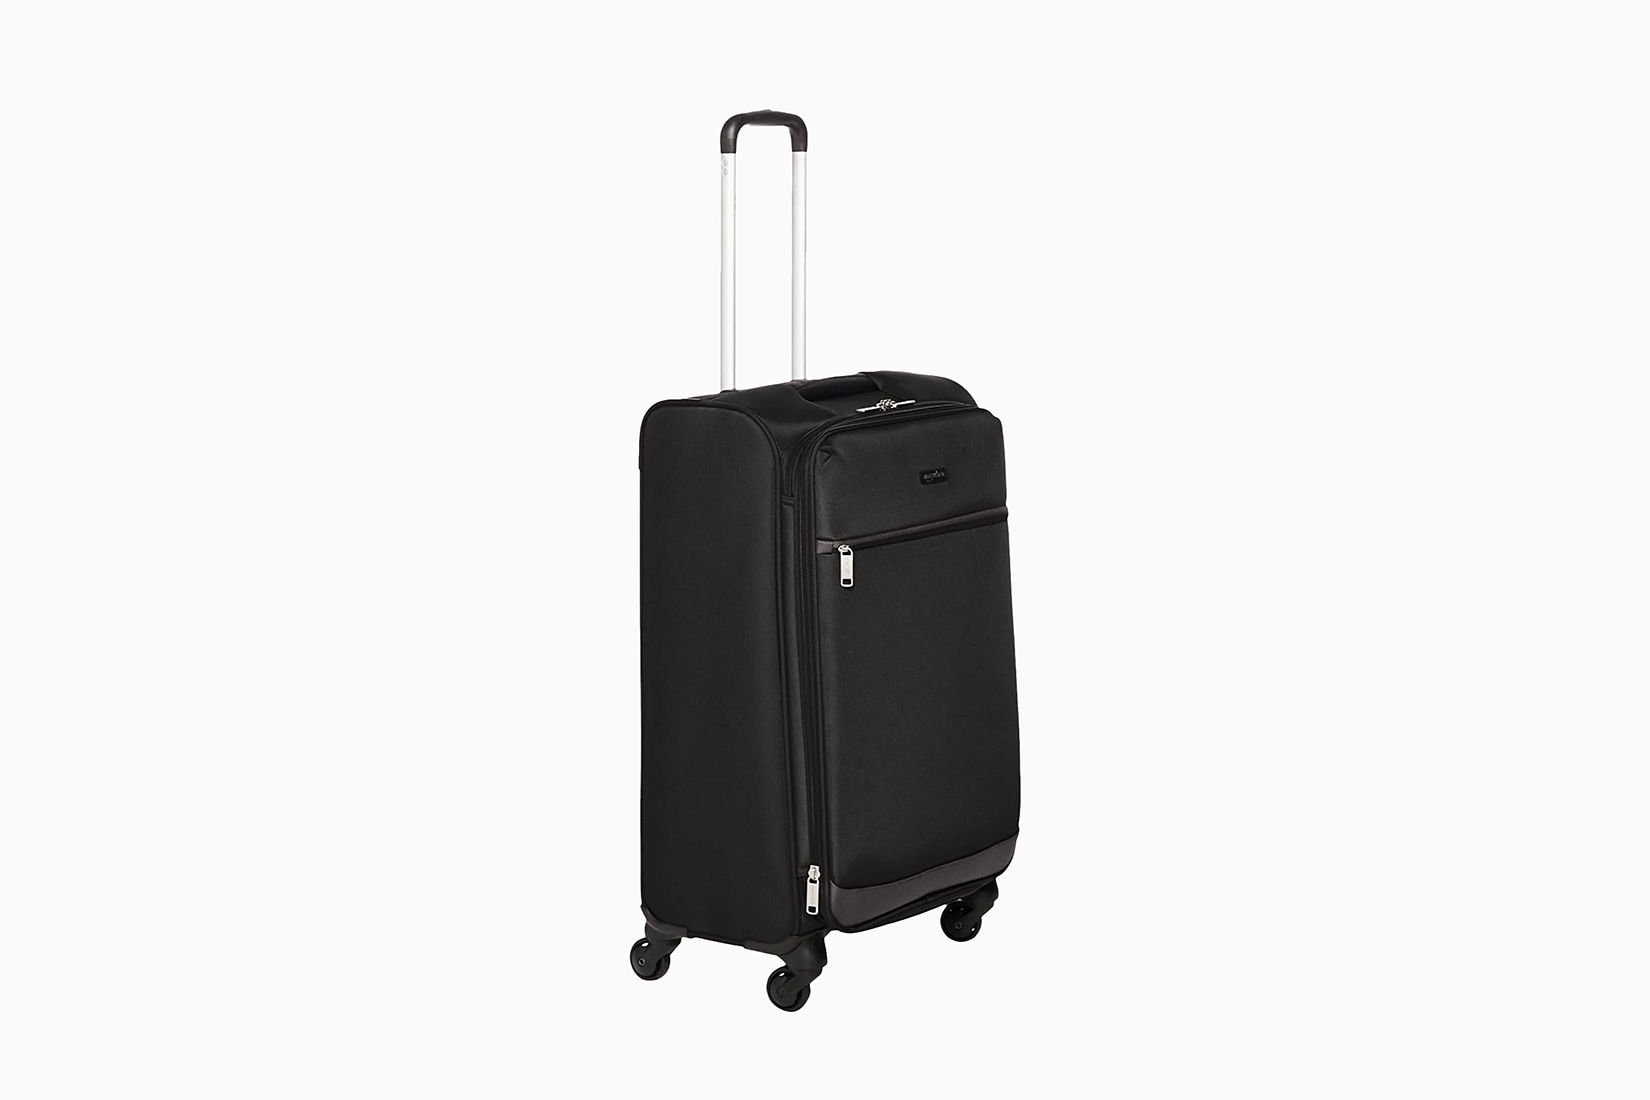 meilleures marques de bagages valise abordable AmazonBasics - Luxe Digital